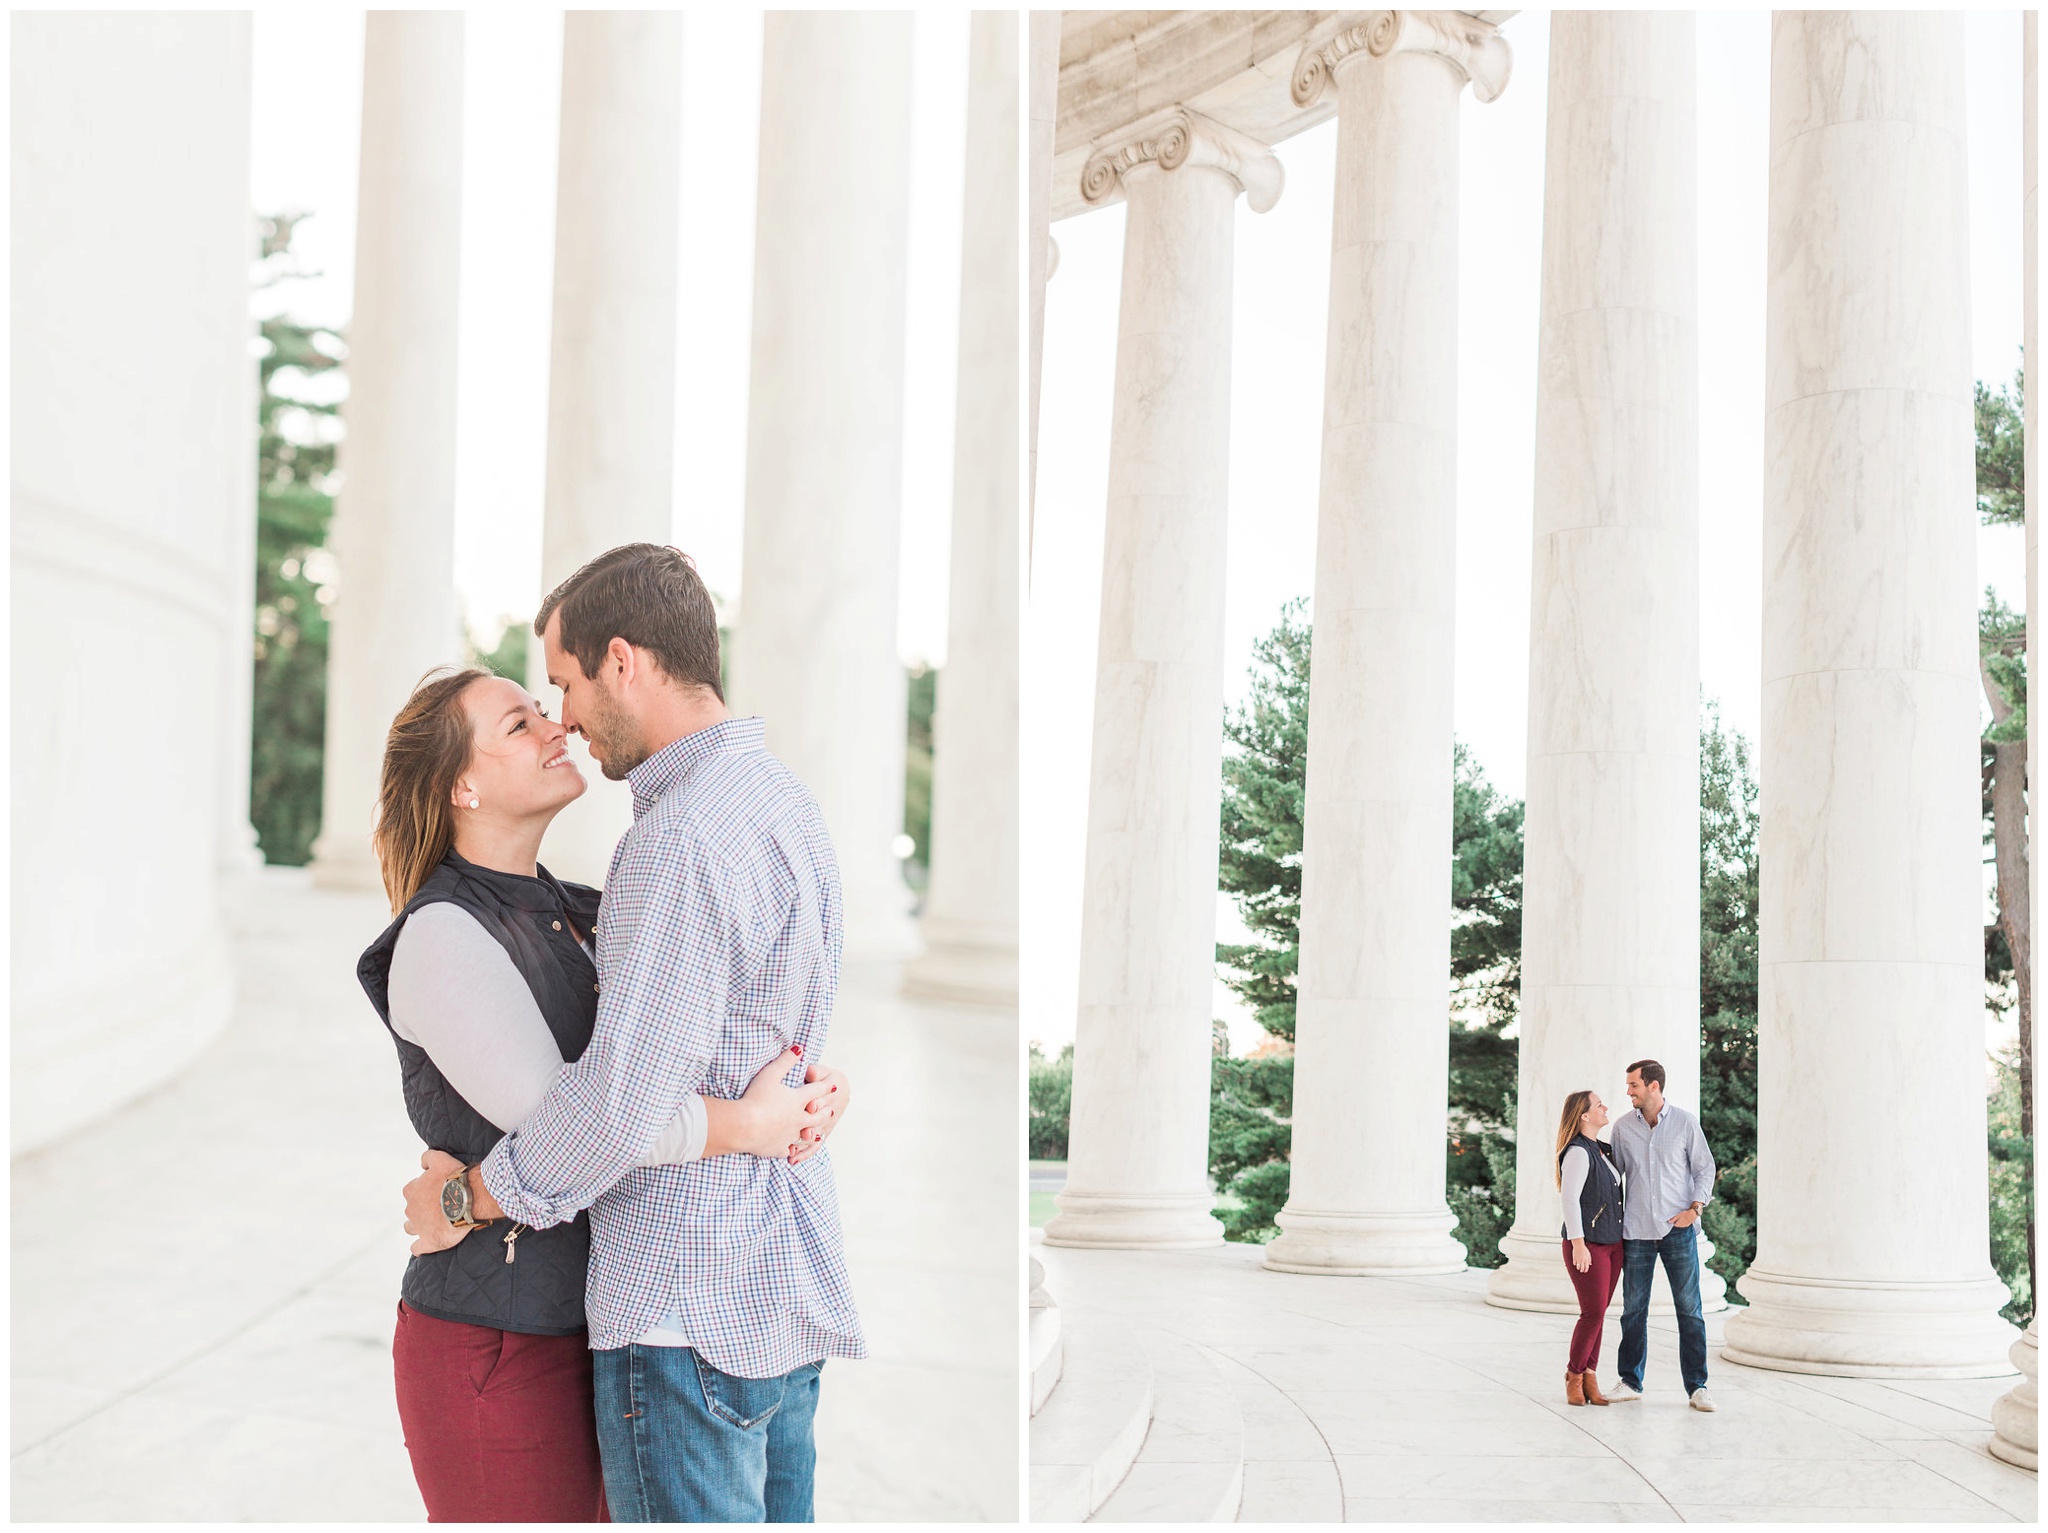 DC Monuments Engagement Session at the Jefferson Memorial